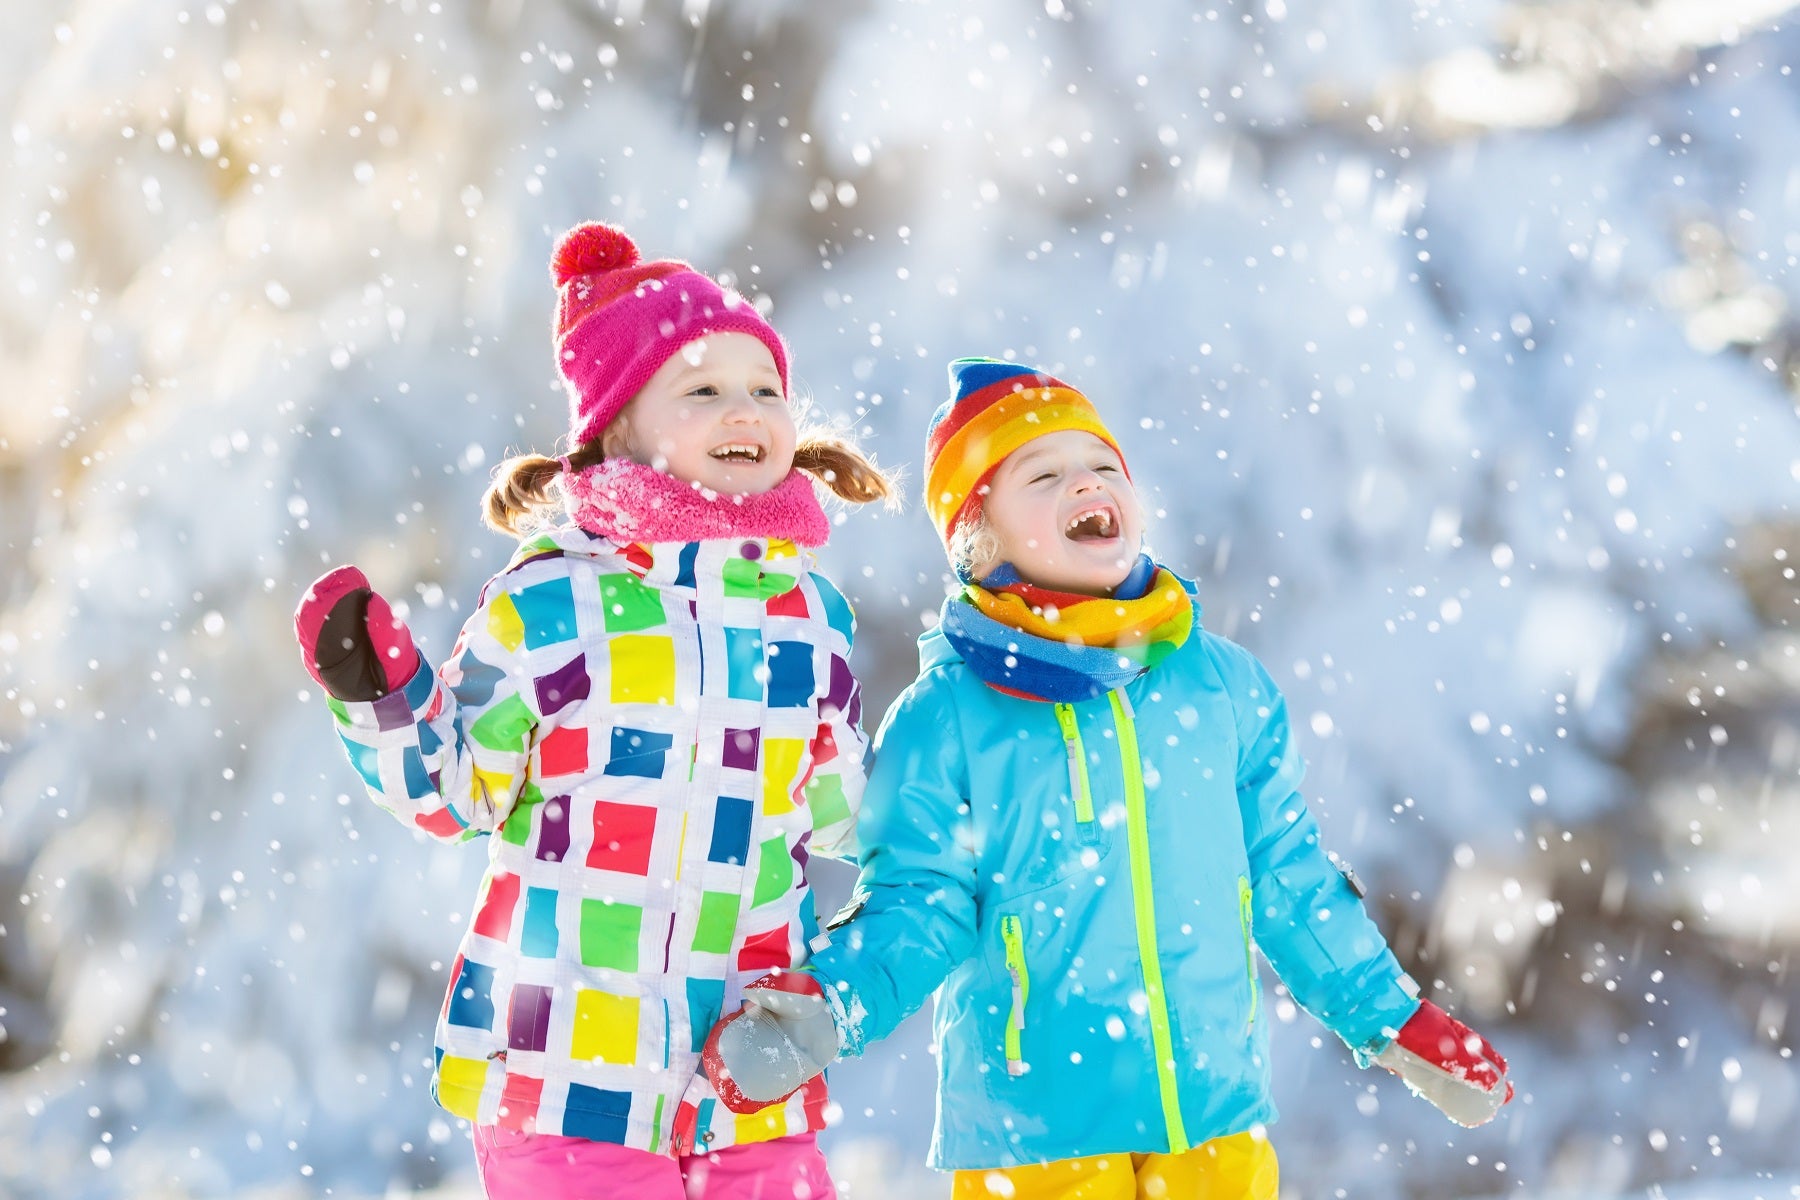 Winter Activities the Whole Family Can Enjoy